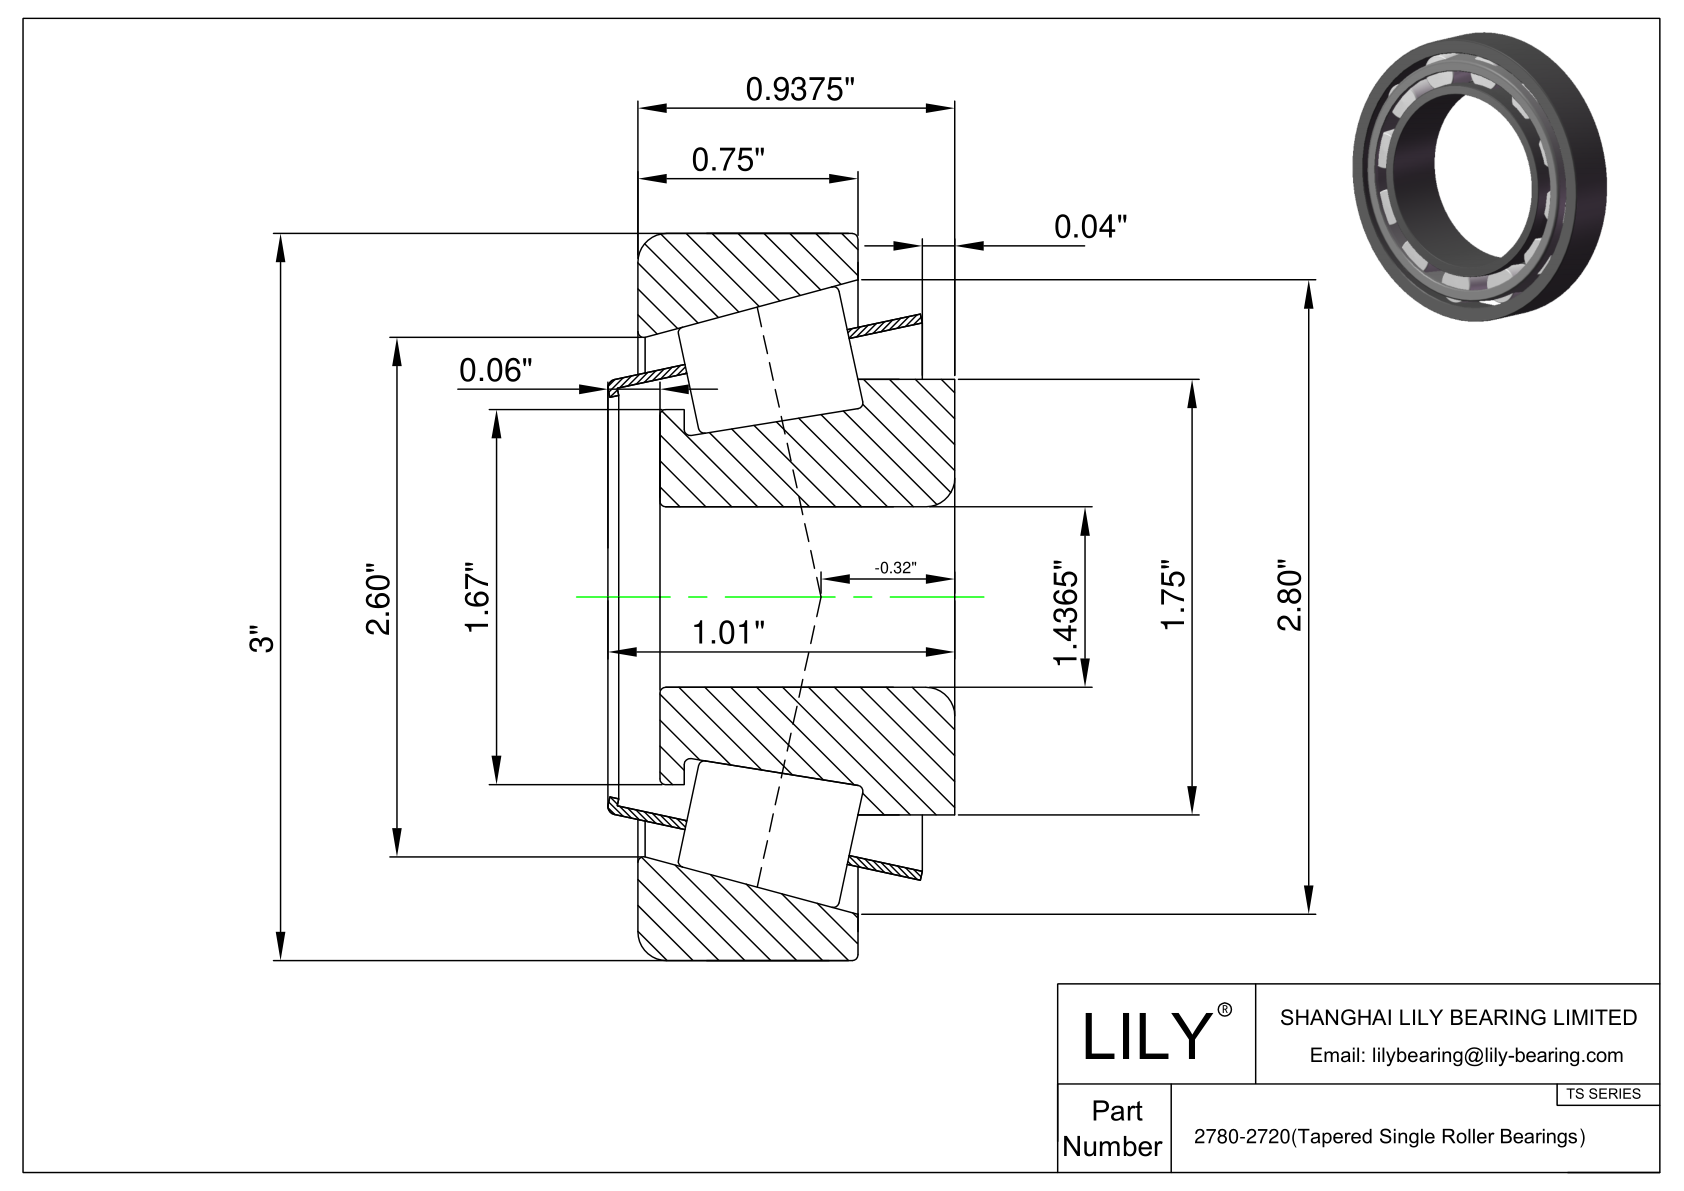 2780-2720 TS (Tapered Single Roller Bearings) (Imperial) cad drawing